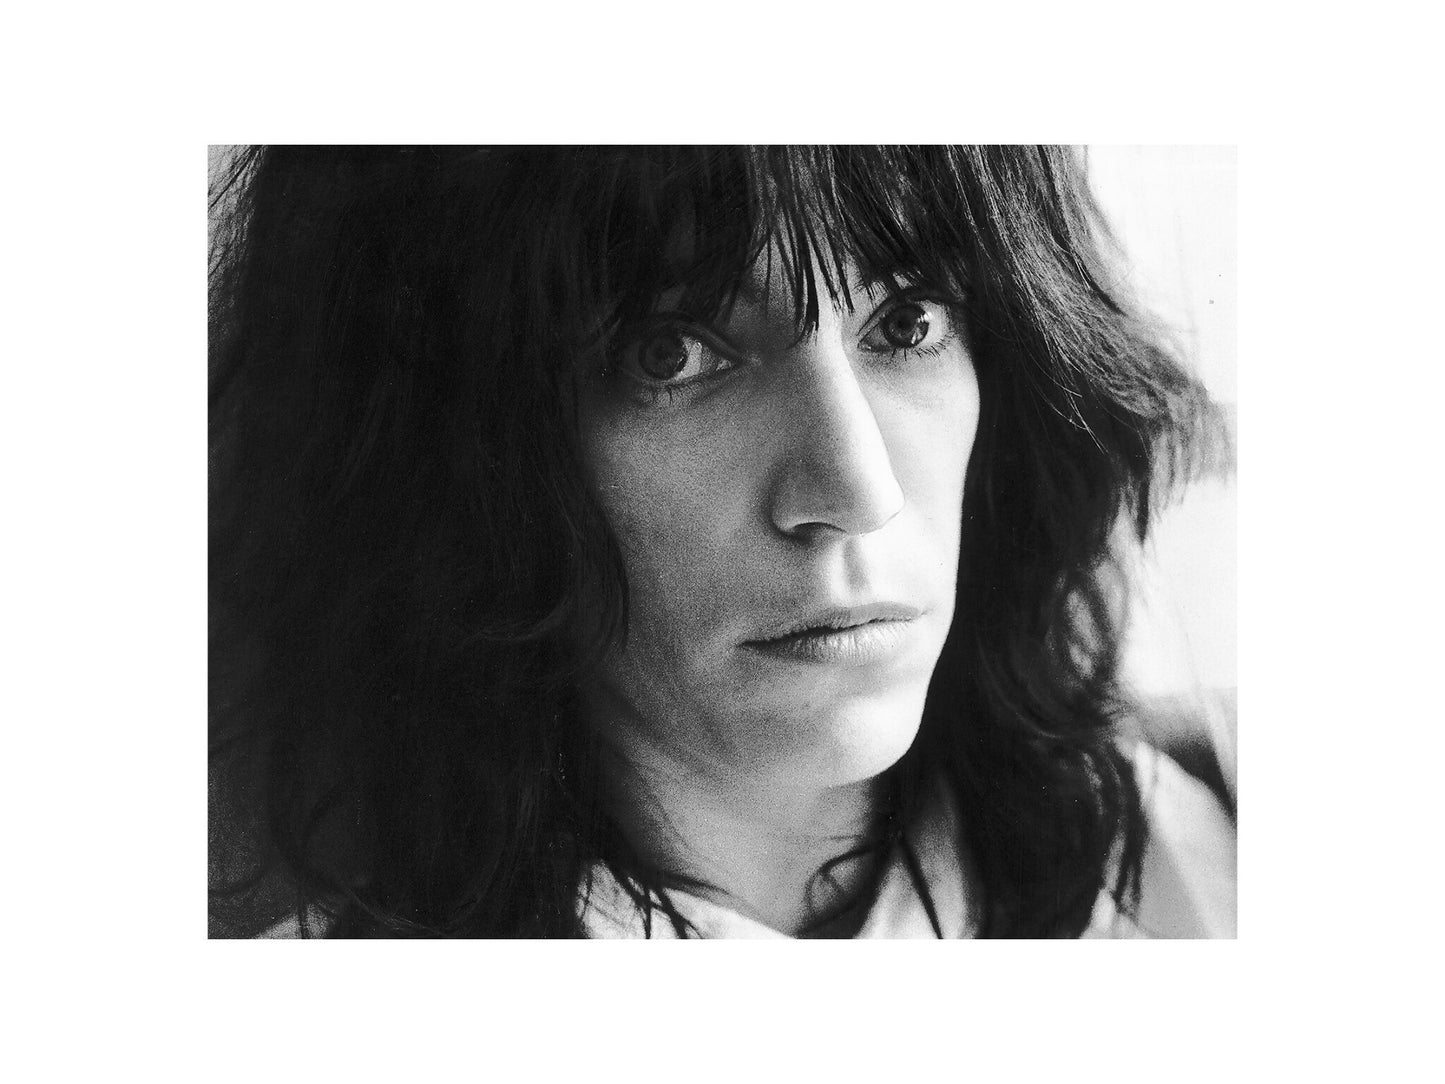 Patti Smith - Portrait of a Young Singer, England, 1976 Print